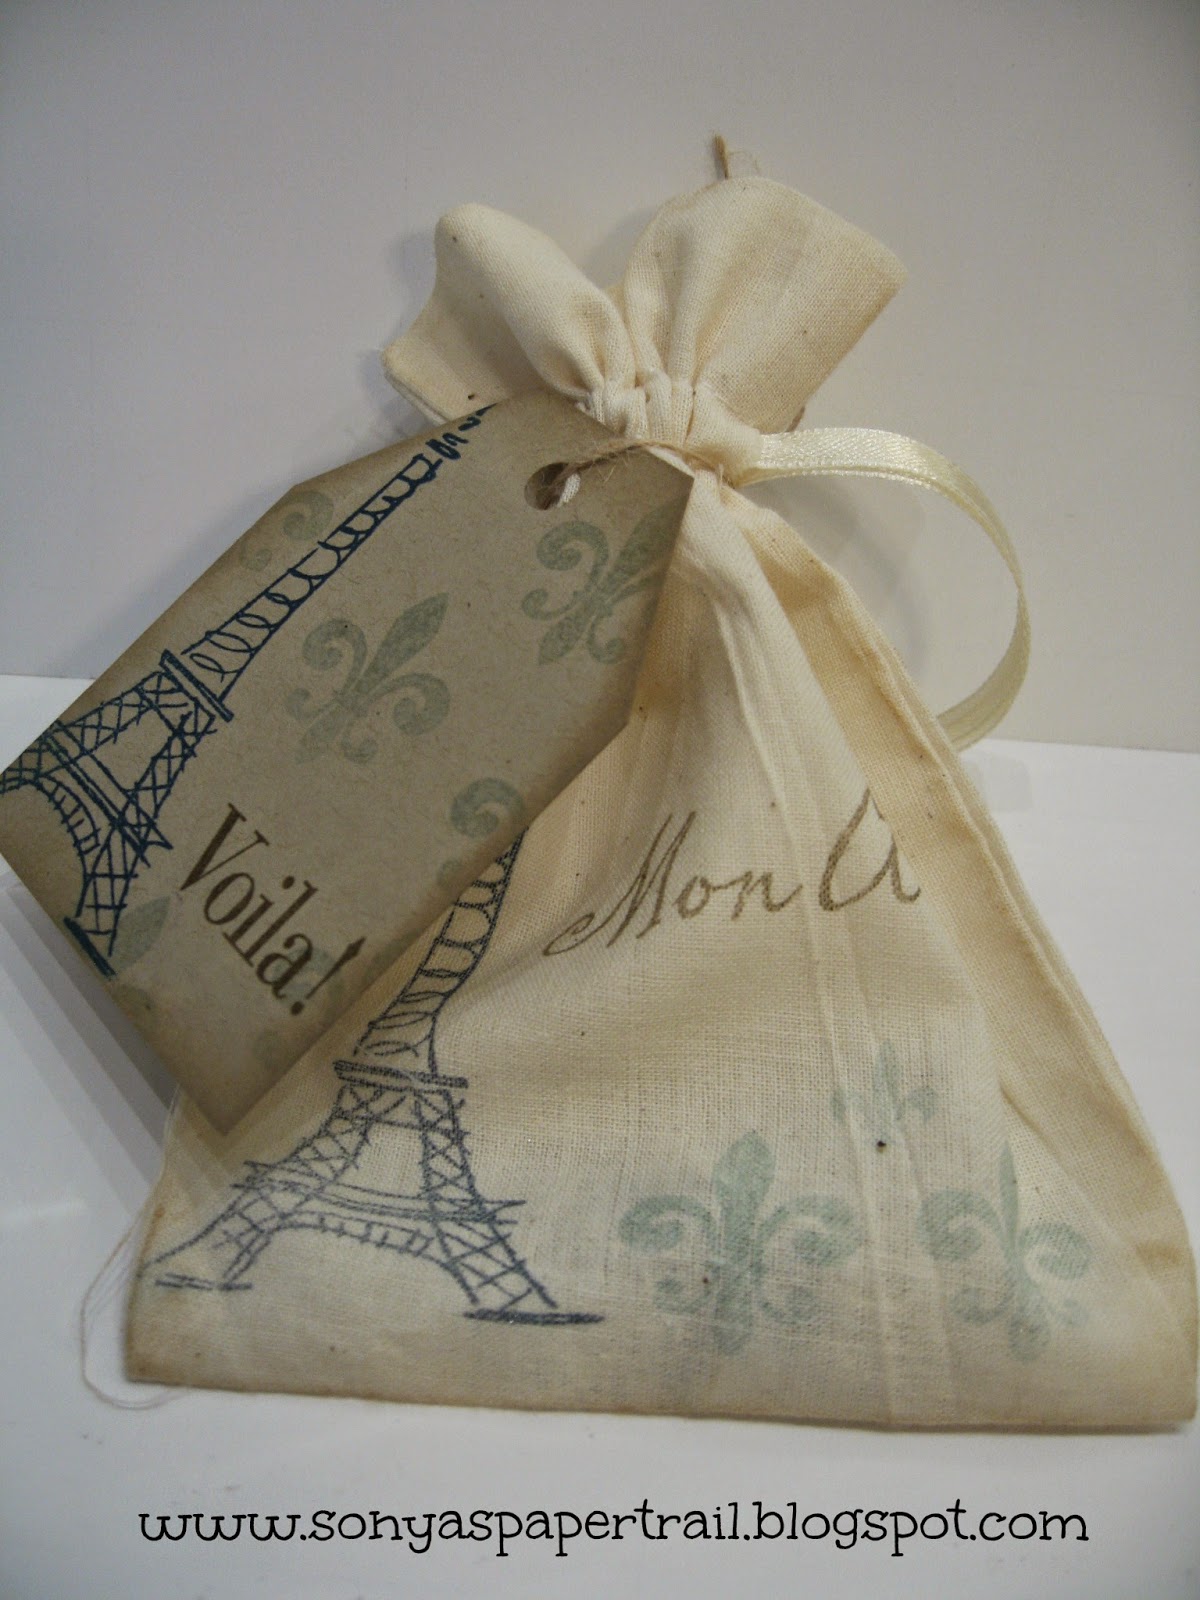 She's a Sassy Lady: Parisian Themed Gift and Stamped Gift Bag